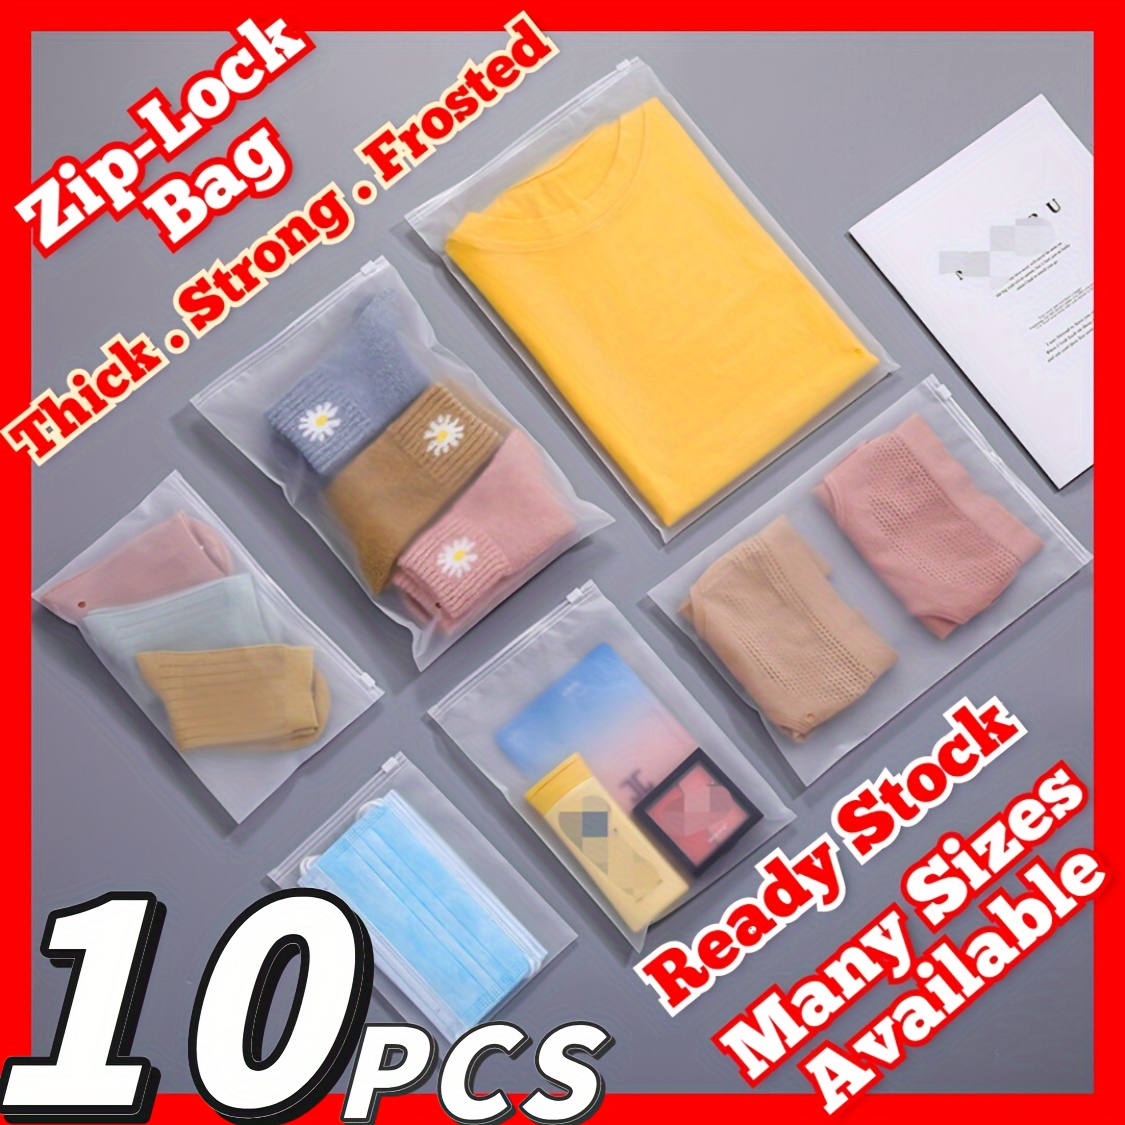 20 Pcs Frosted Resealable Bag Plastic Zip-lock Seal Clothes Bags Travel  Space Saver Storage Waterproof Luggage Organiser Pouch For Clothes Garment  Sch